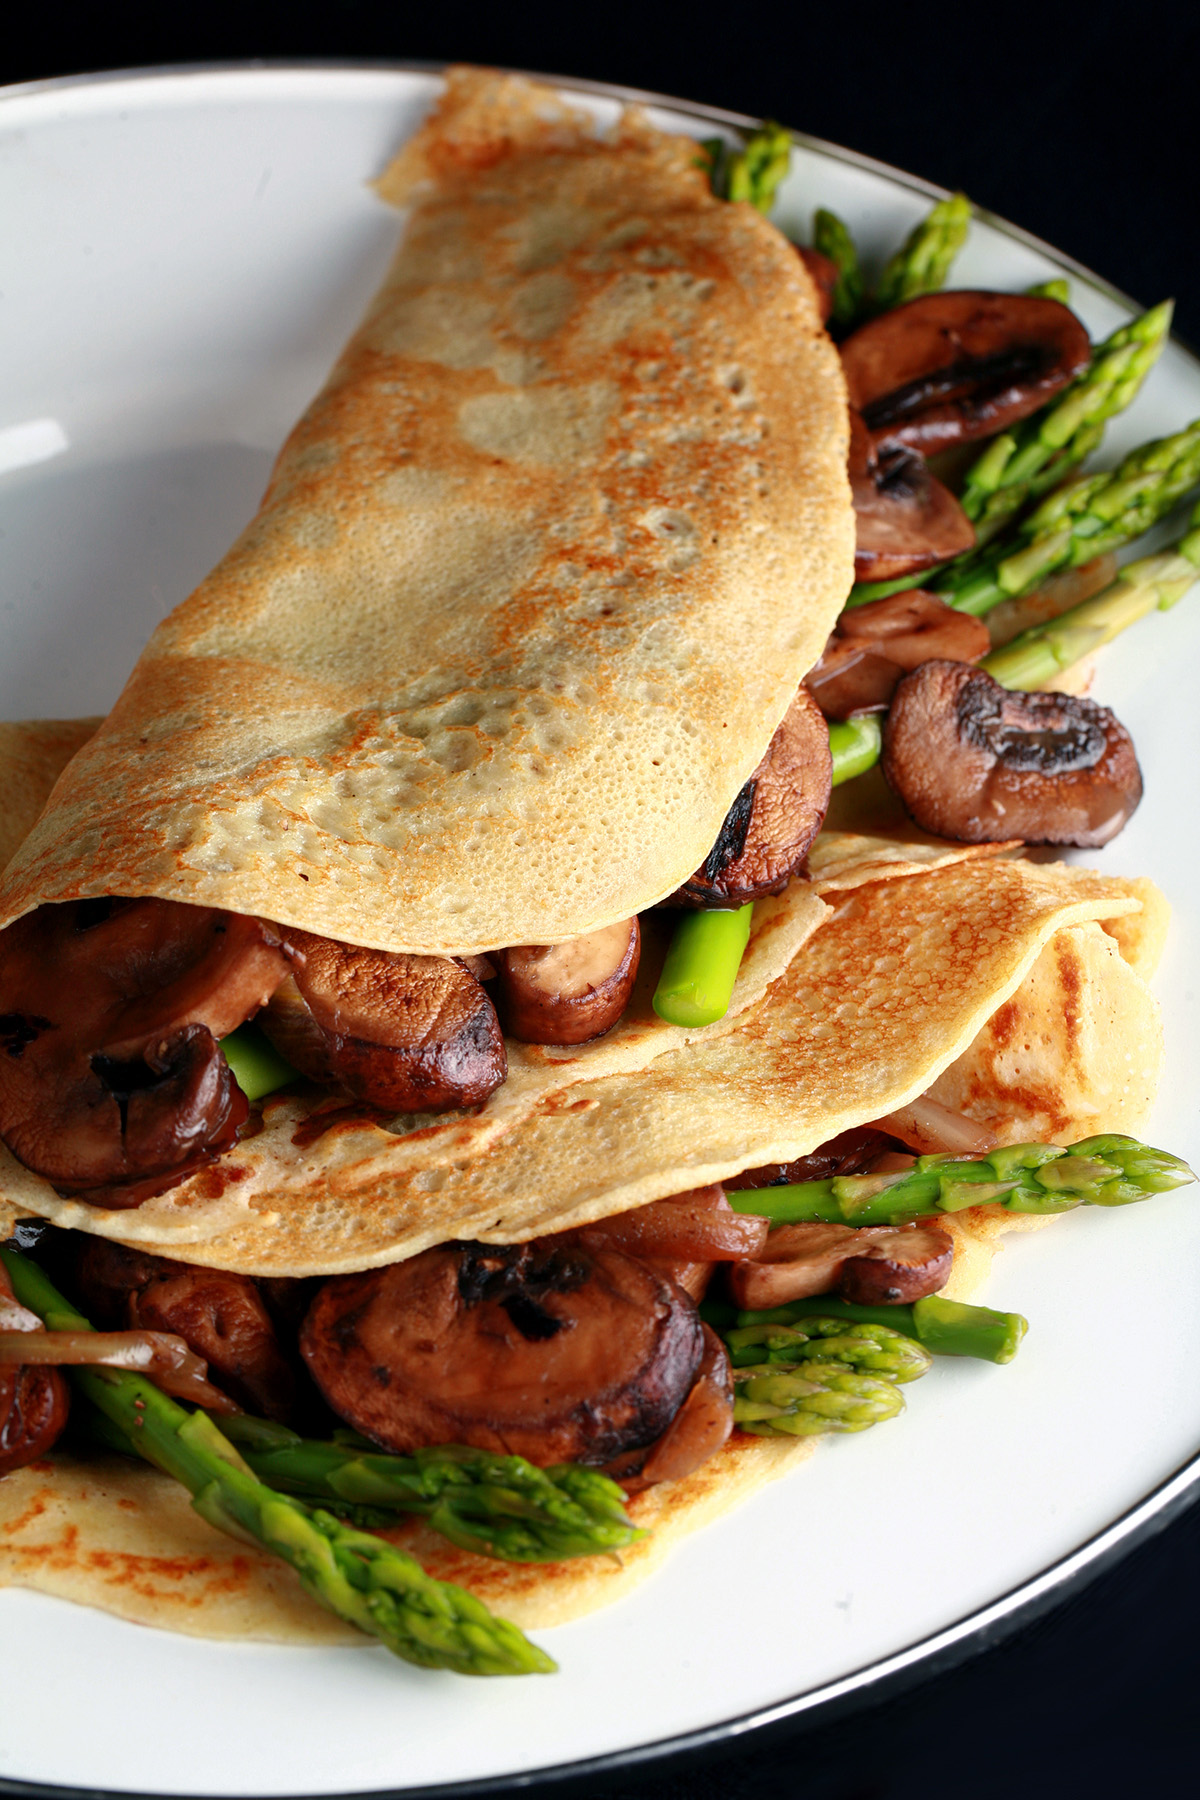 Two gluten free crepes with mushroom and asparagus filling.